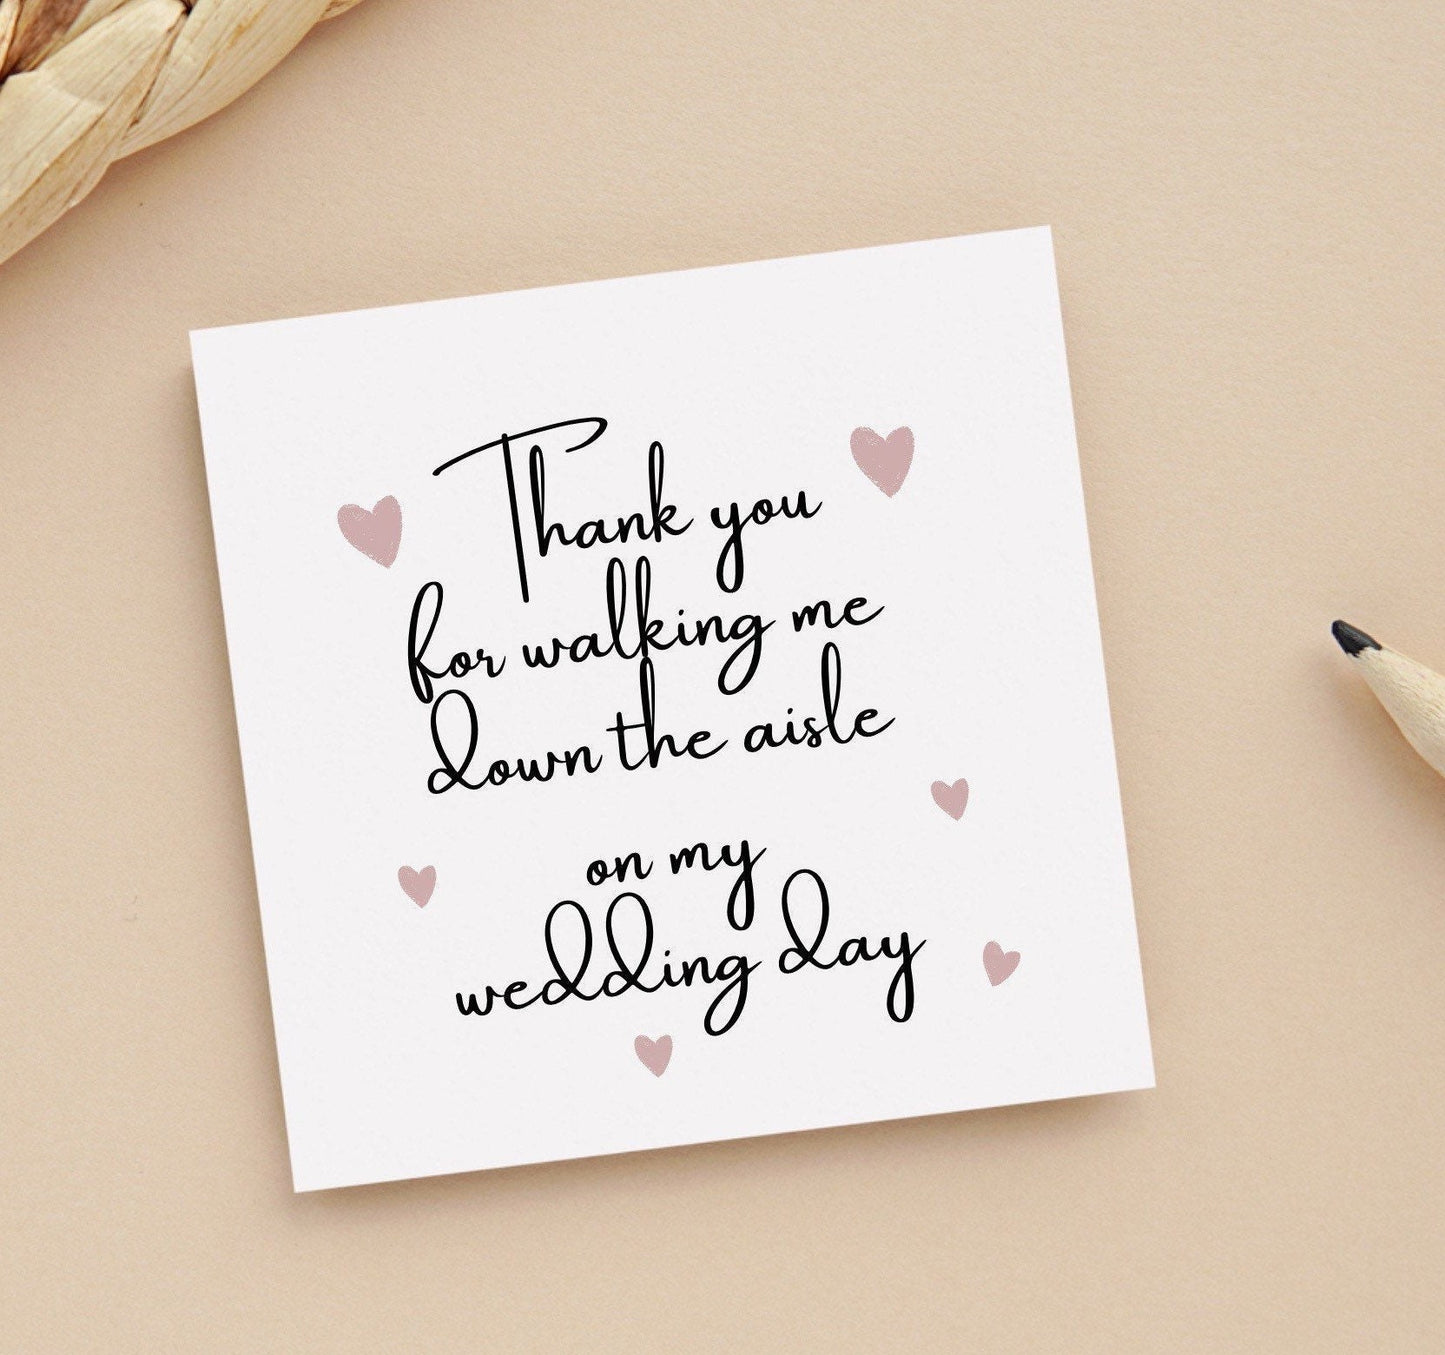 Thank you for walking me down the aisle, card to say thank you to dad or special someone walking down aisle on wedding day